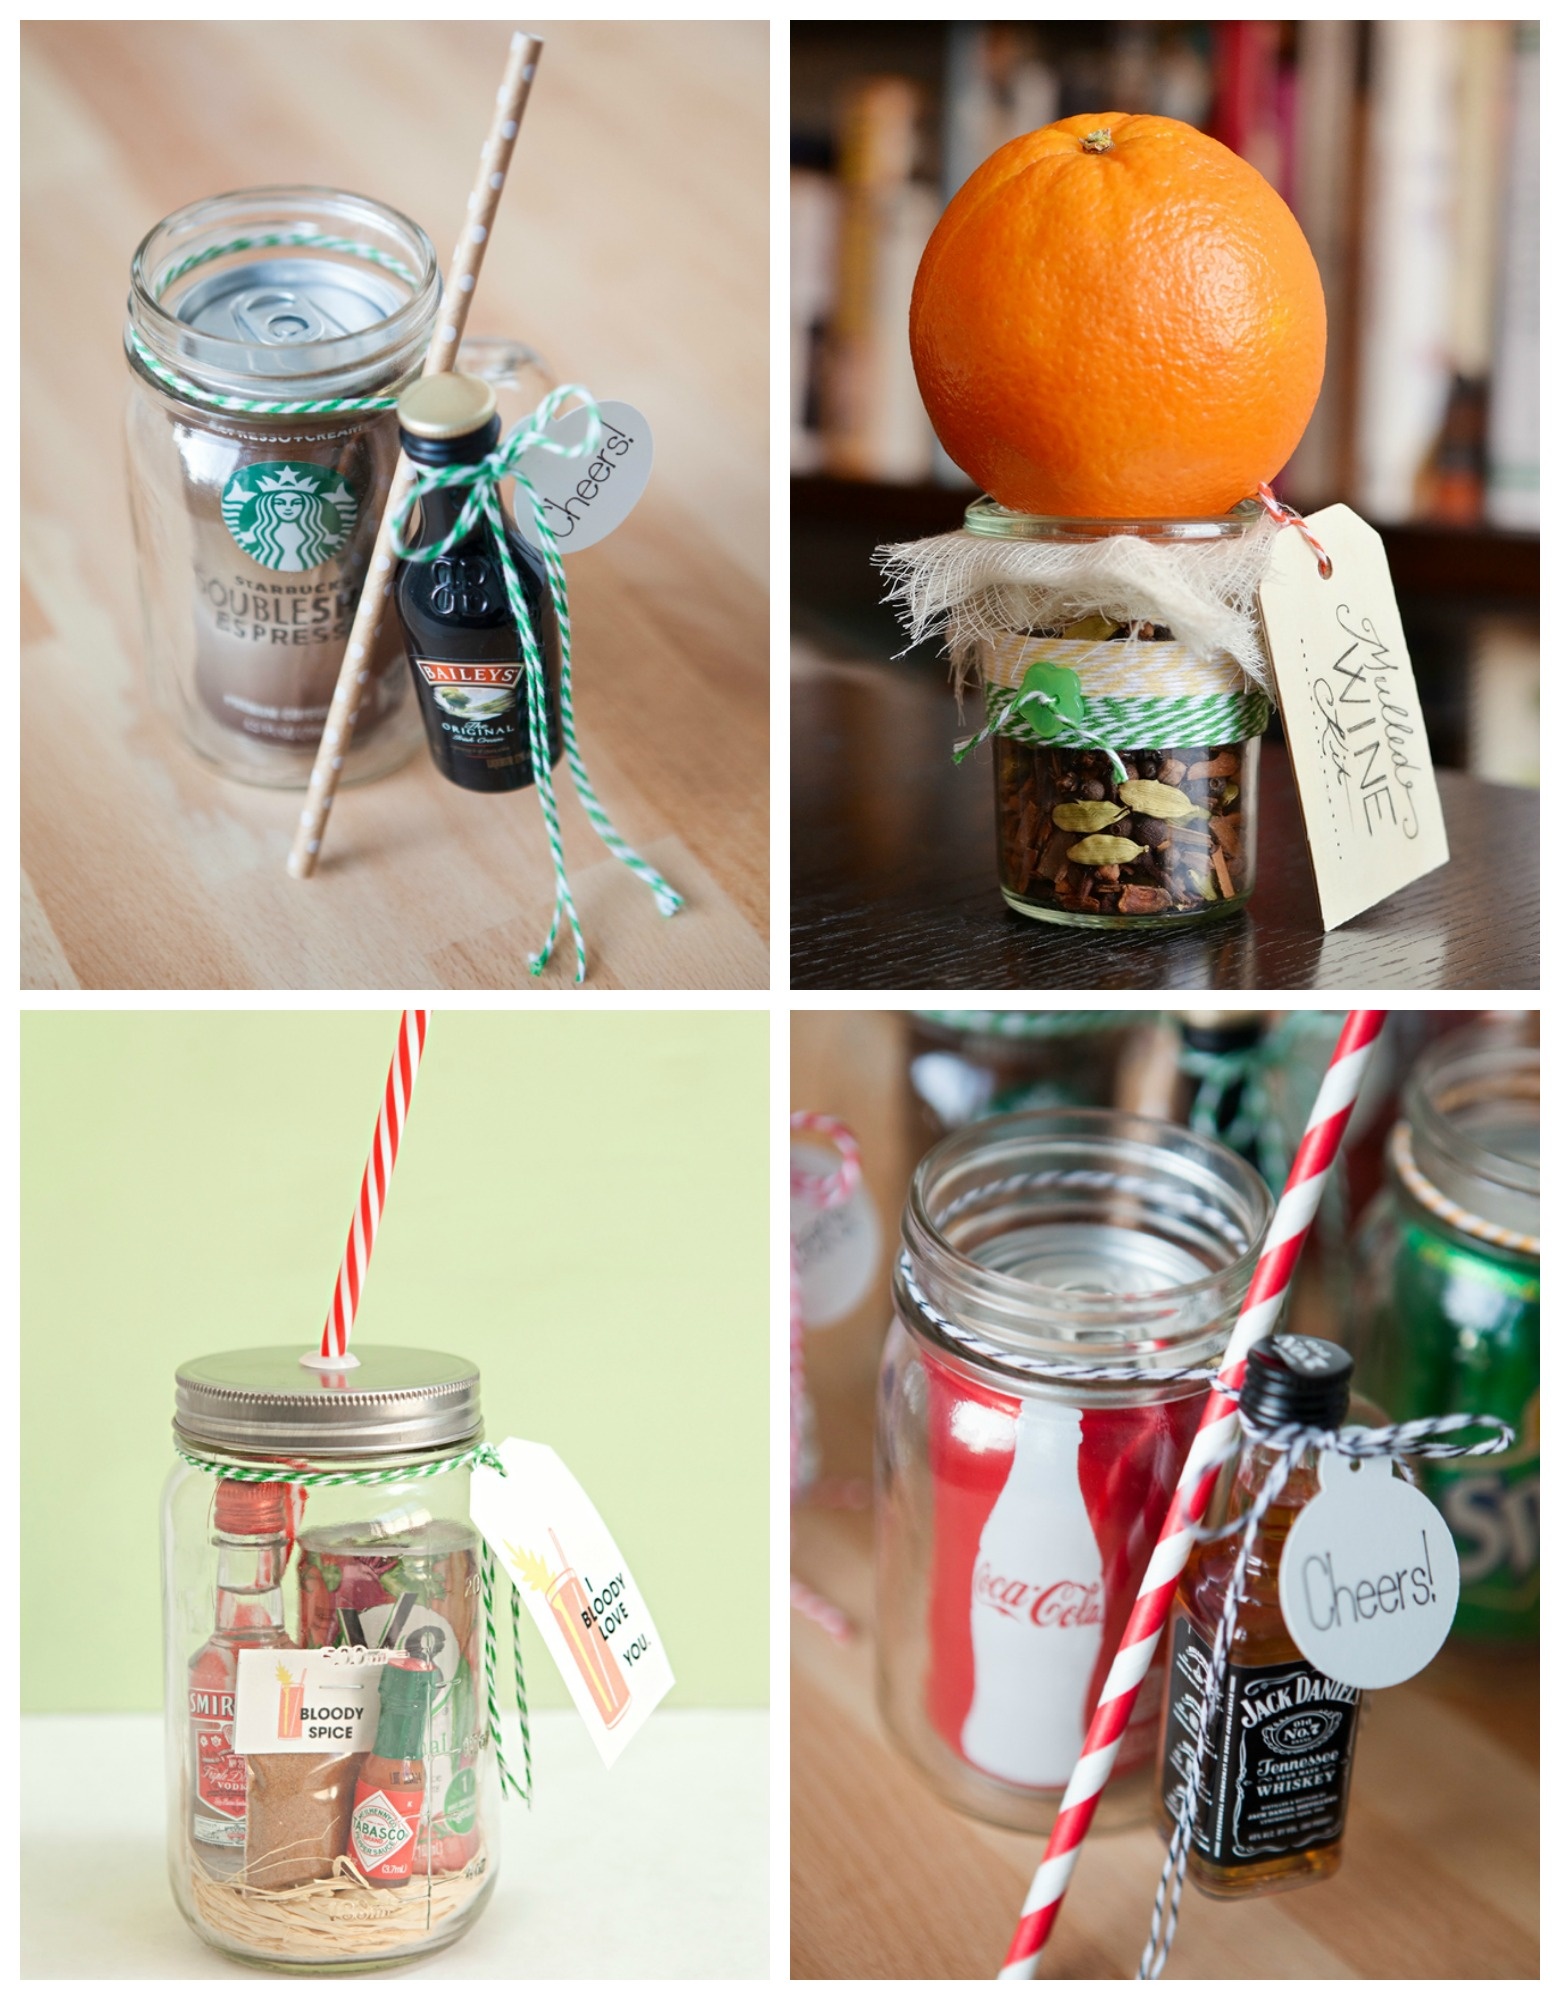 DIY Mason Jar Cocktail Kits Your Guests Will Adore - Zola Expert